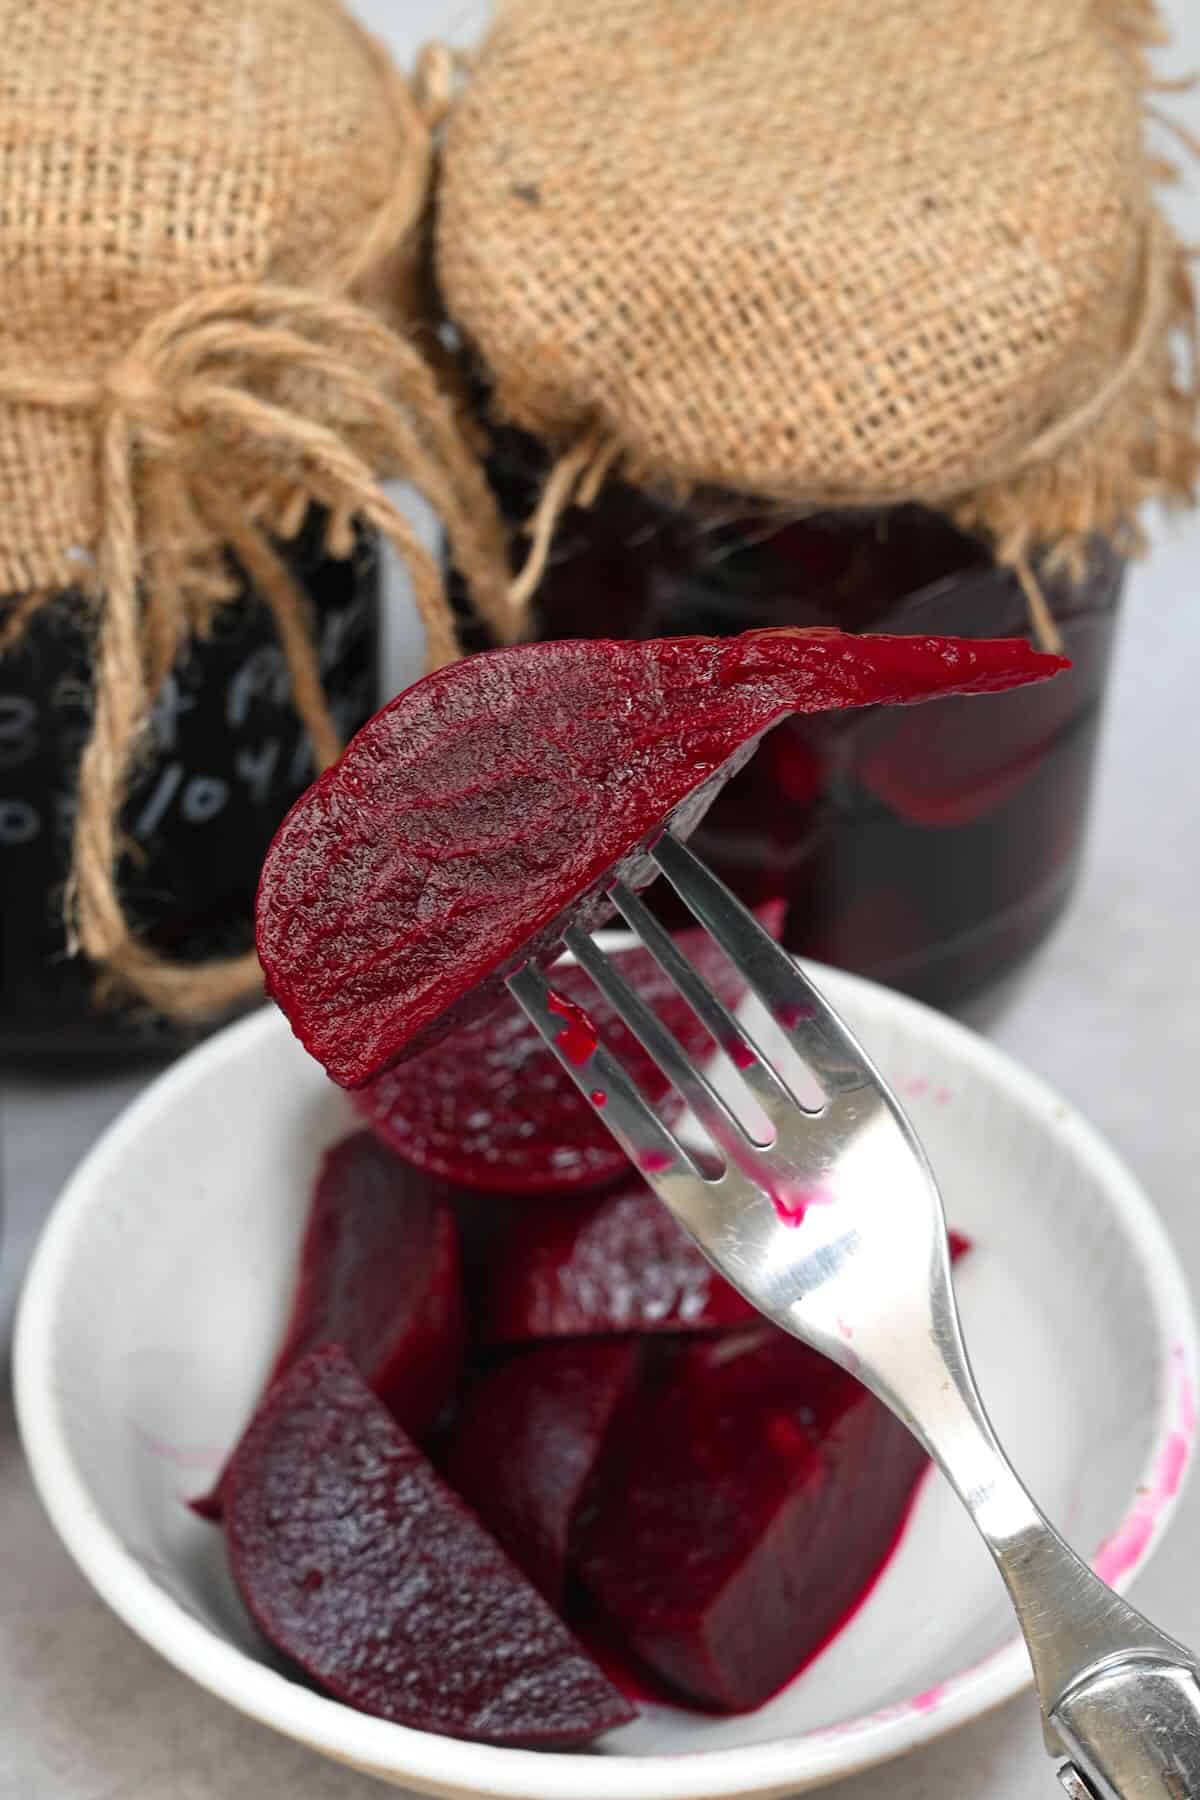 A fork with a pickled beet piece